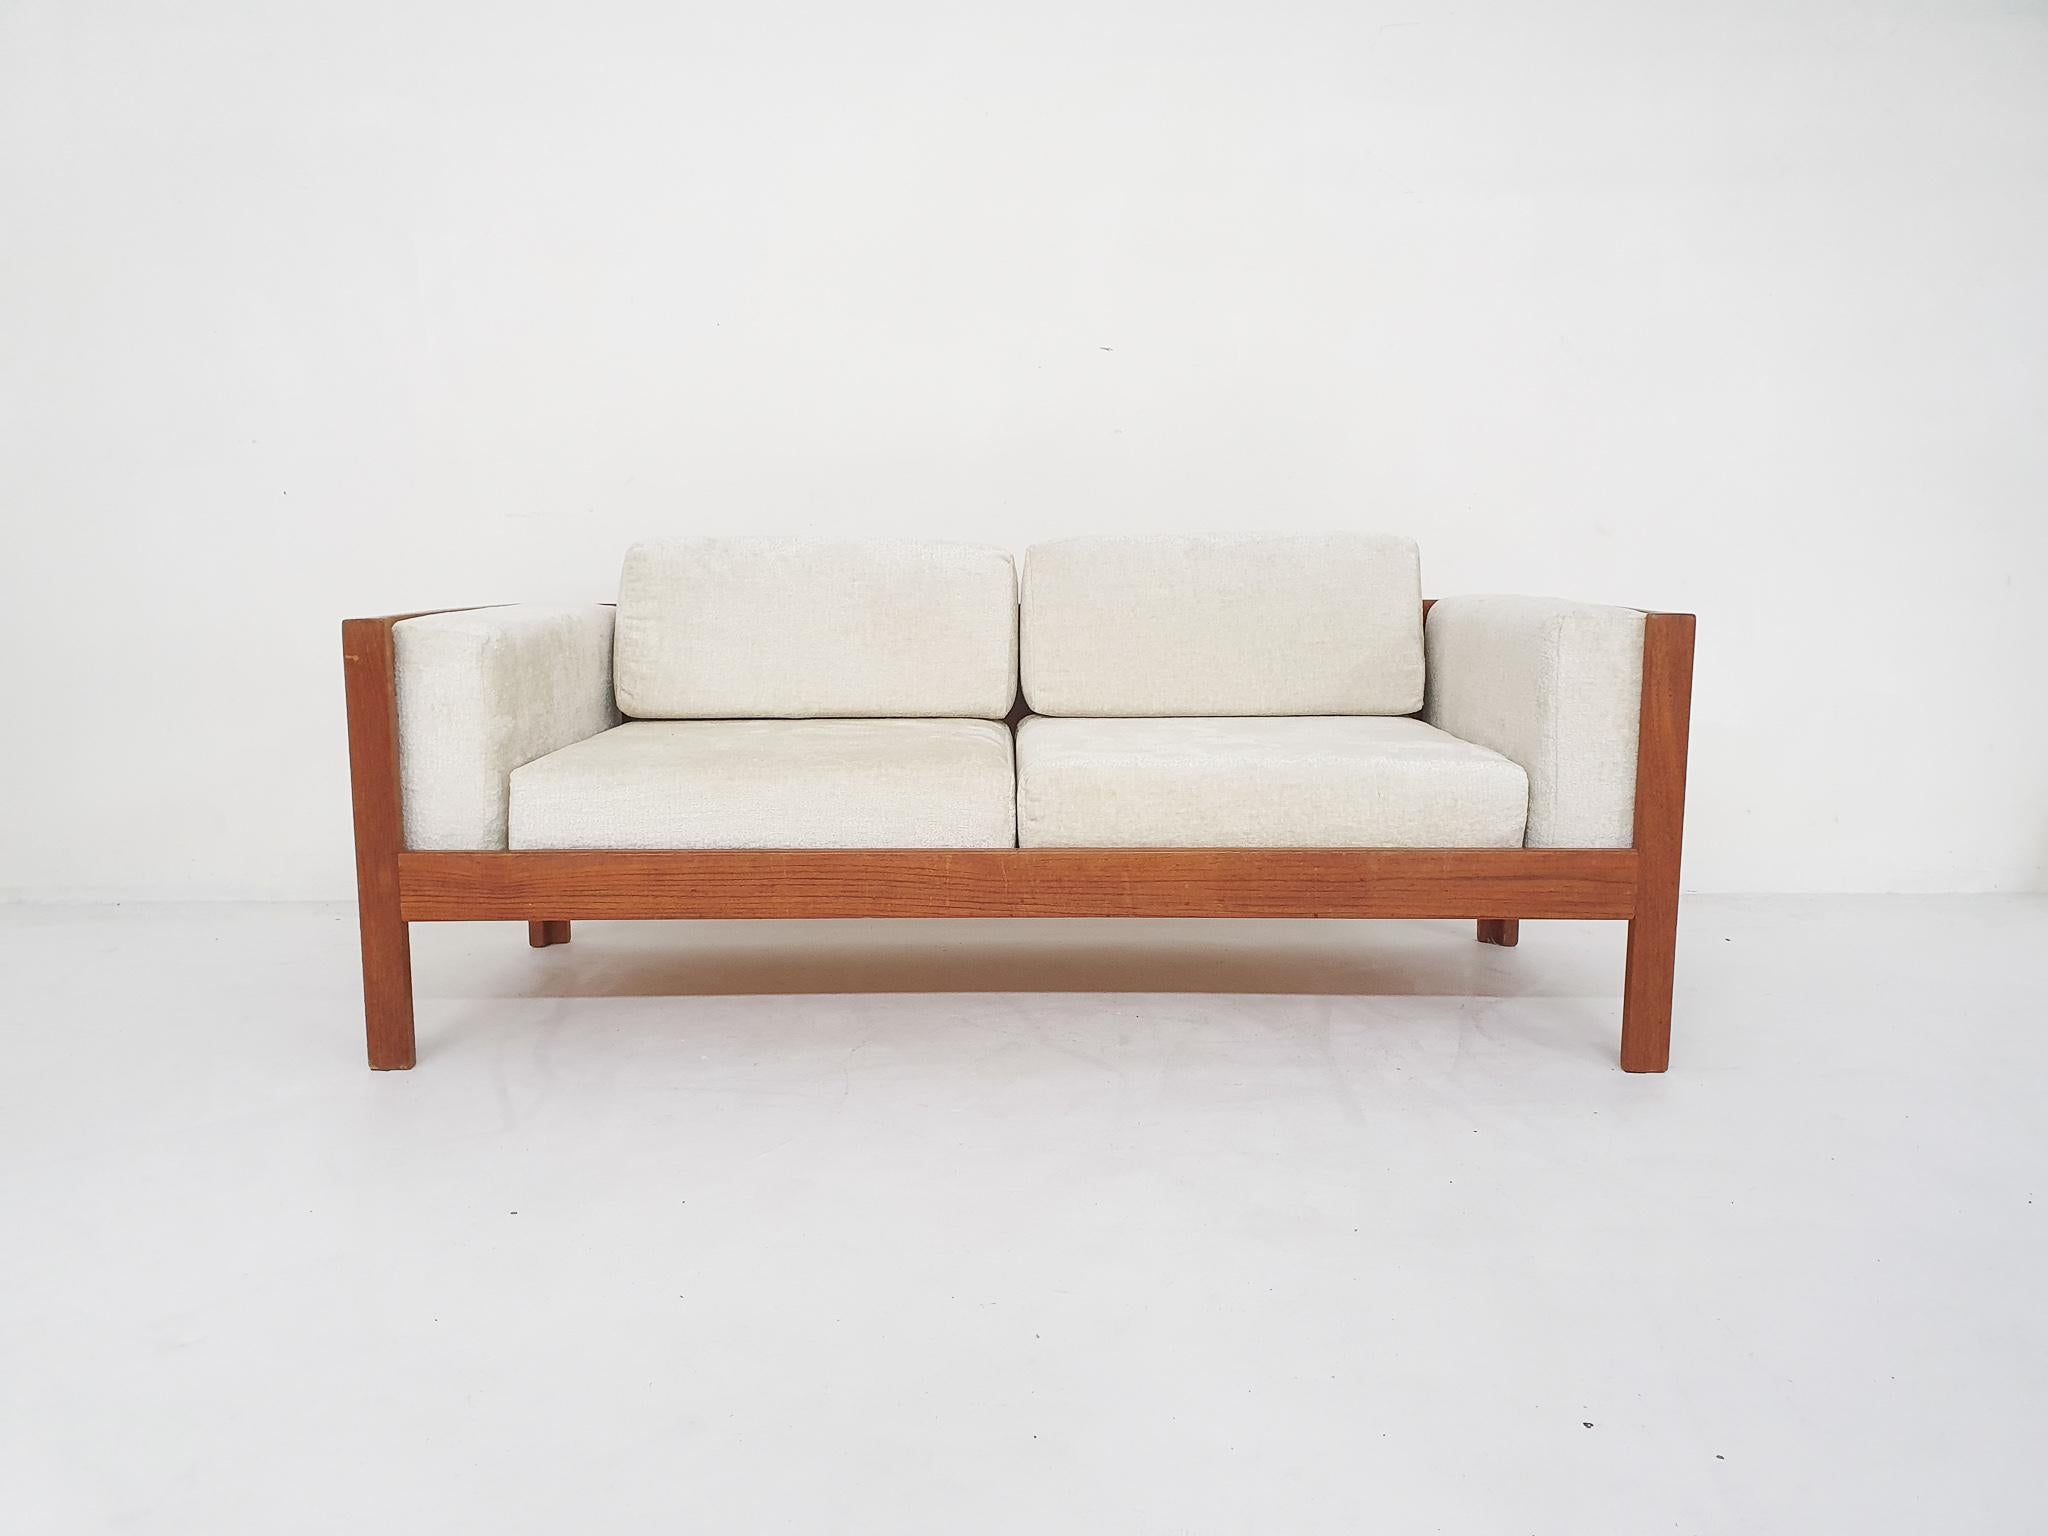 Two seater sofa in teak with loose cushions re-uphosltered in off-white boucle style fabric.
